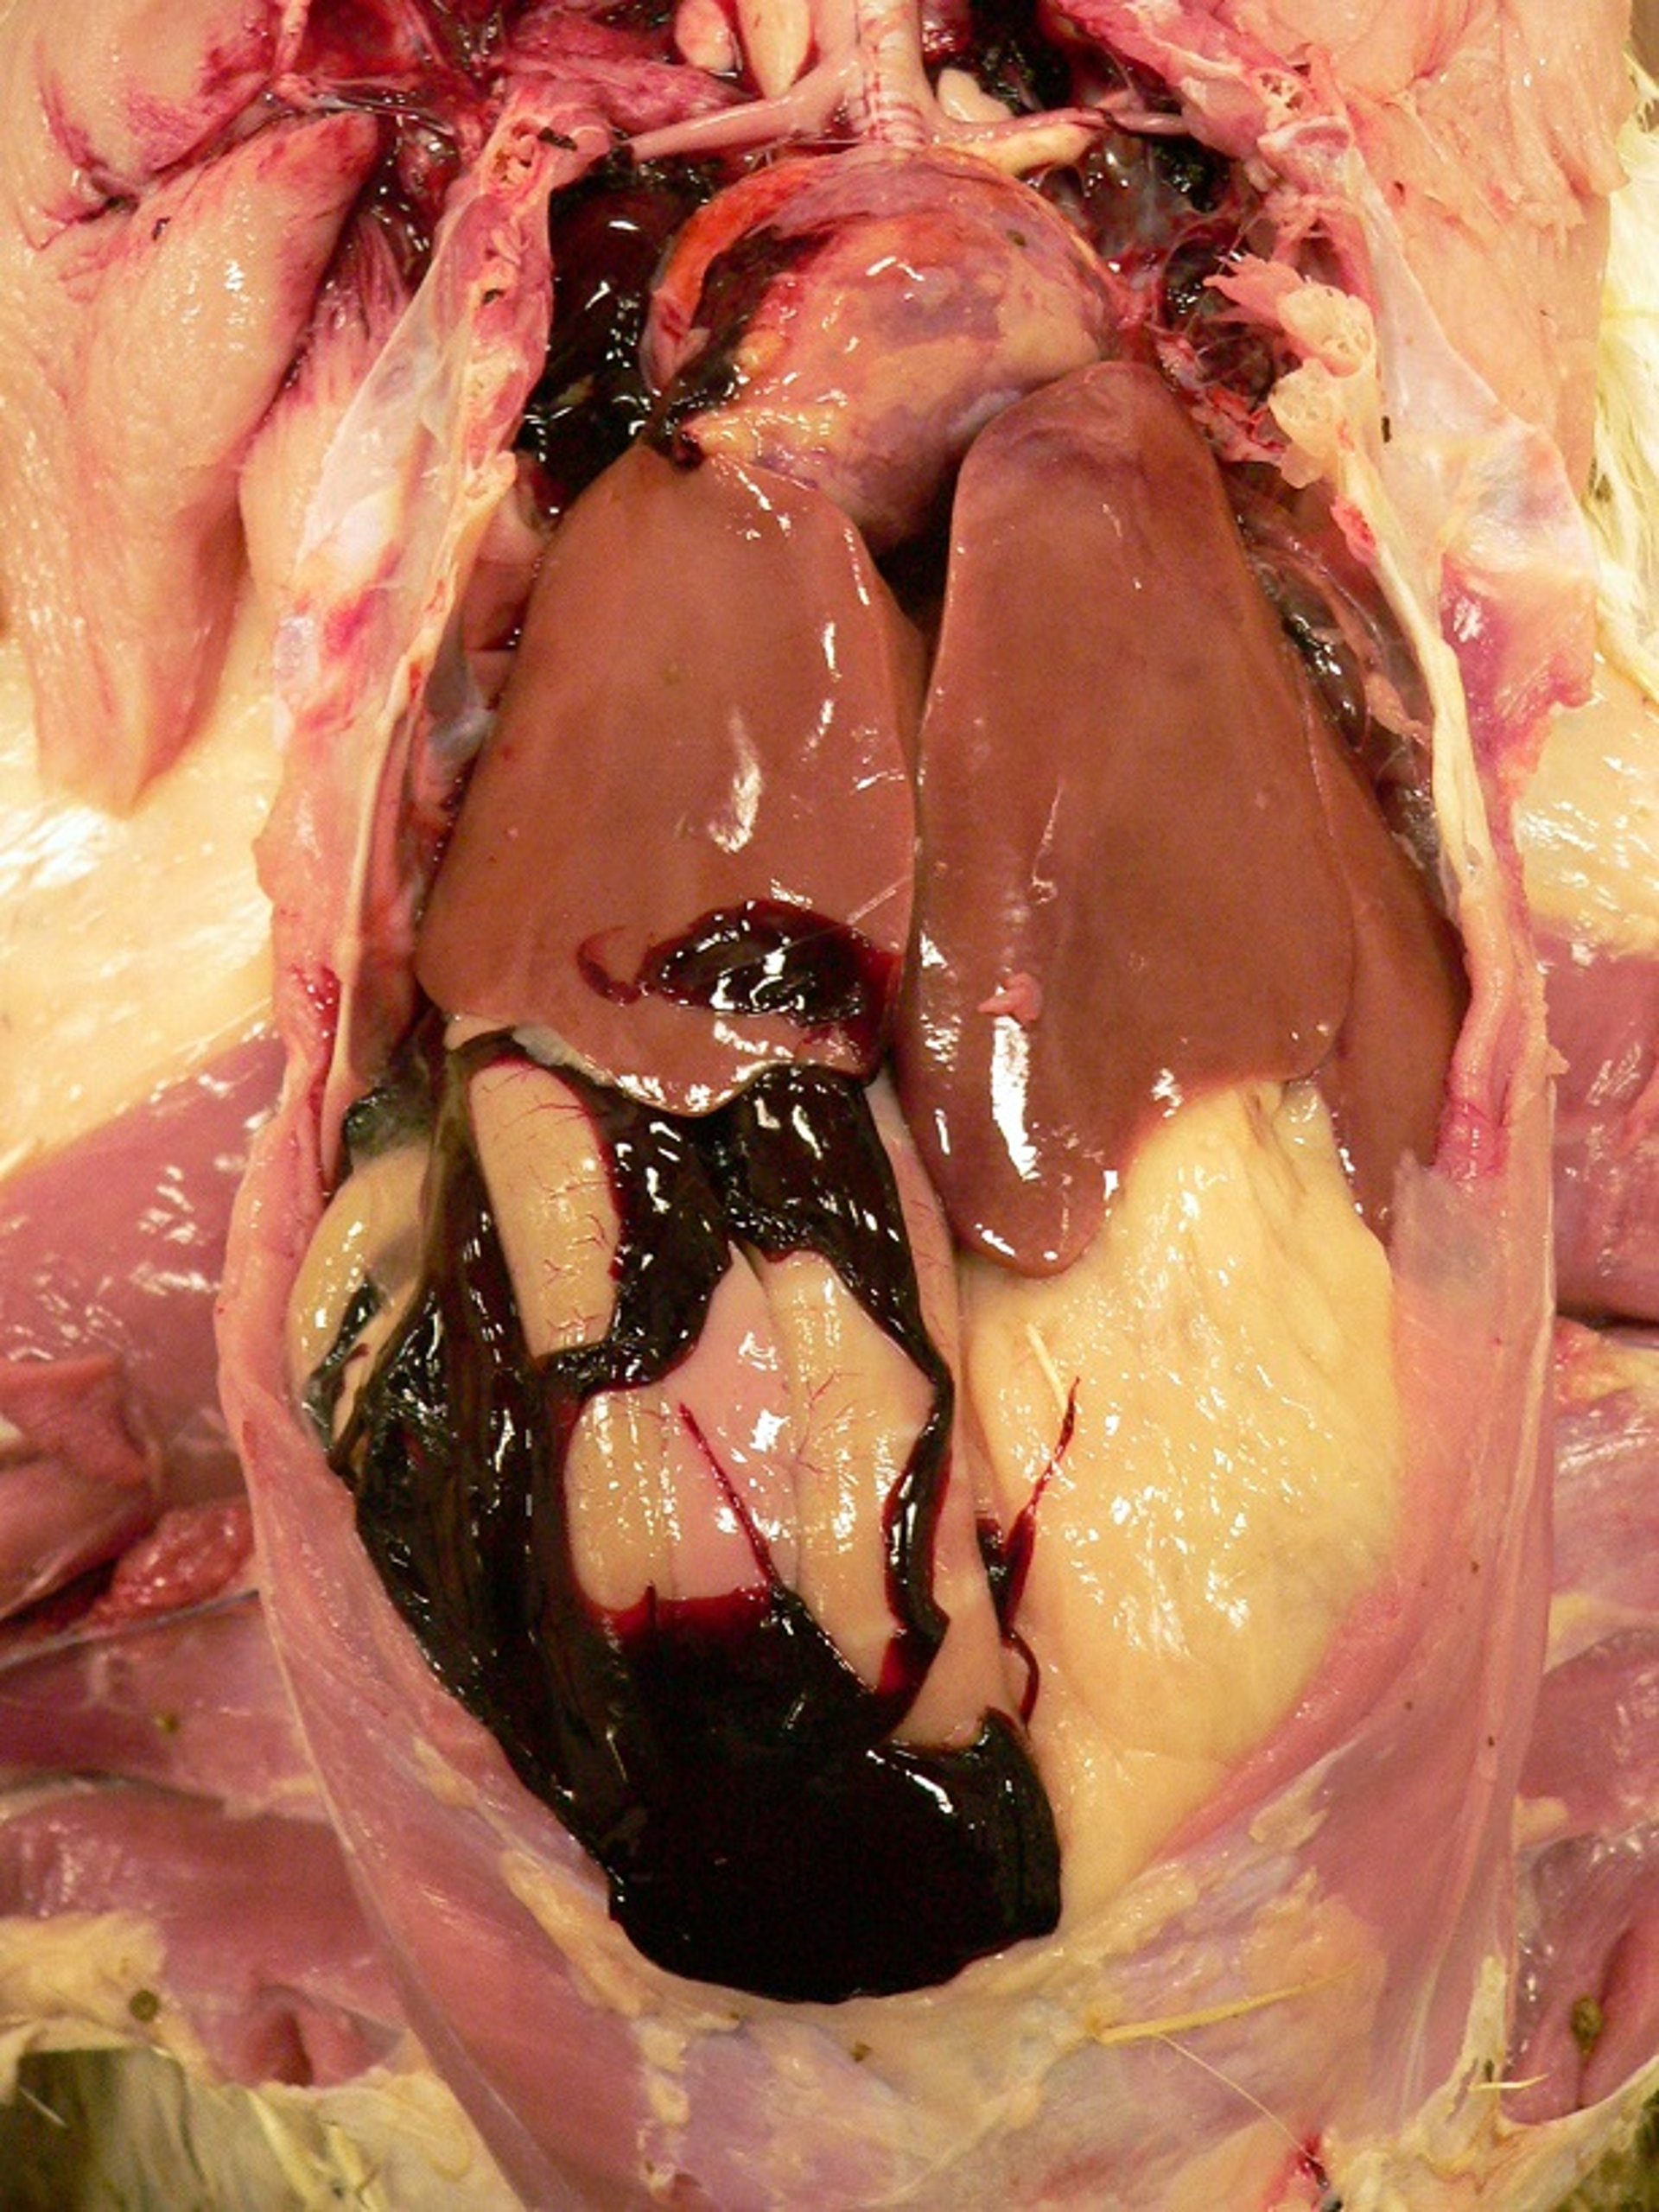 Blood in the coelomic cavity, aortic rupture, turkey